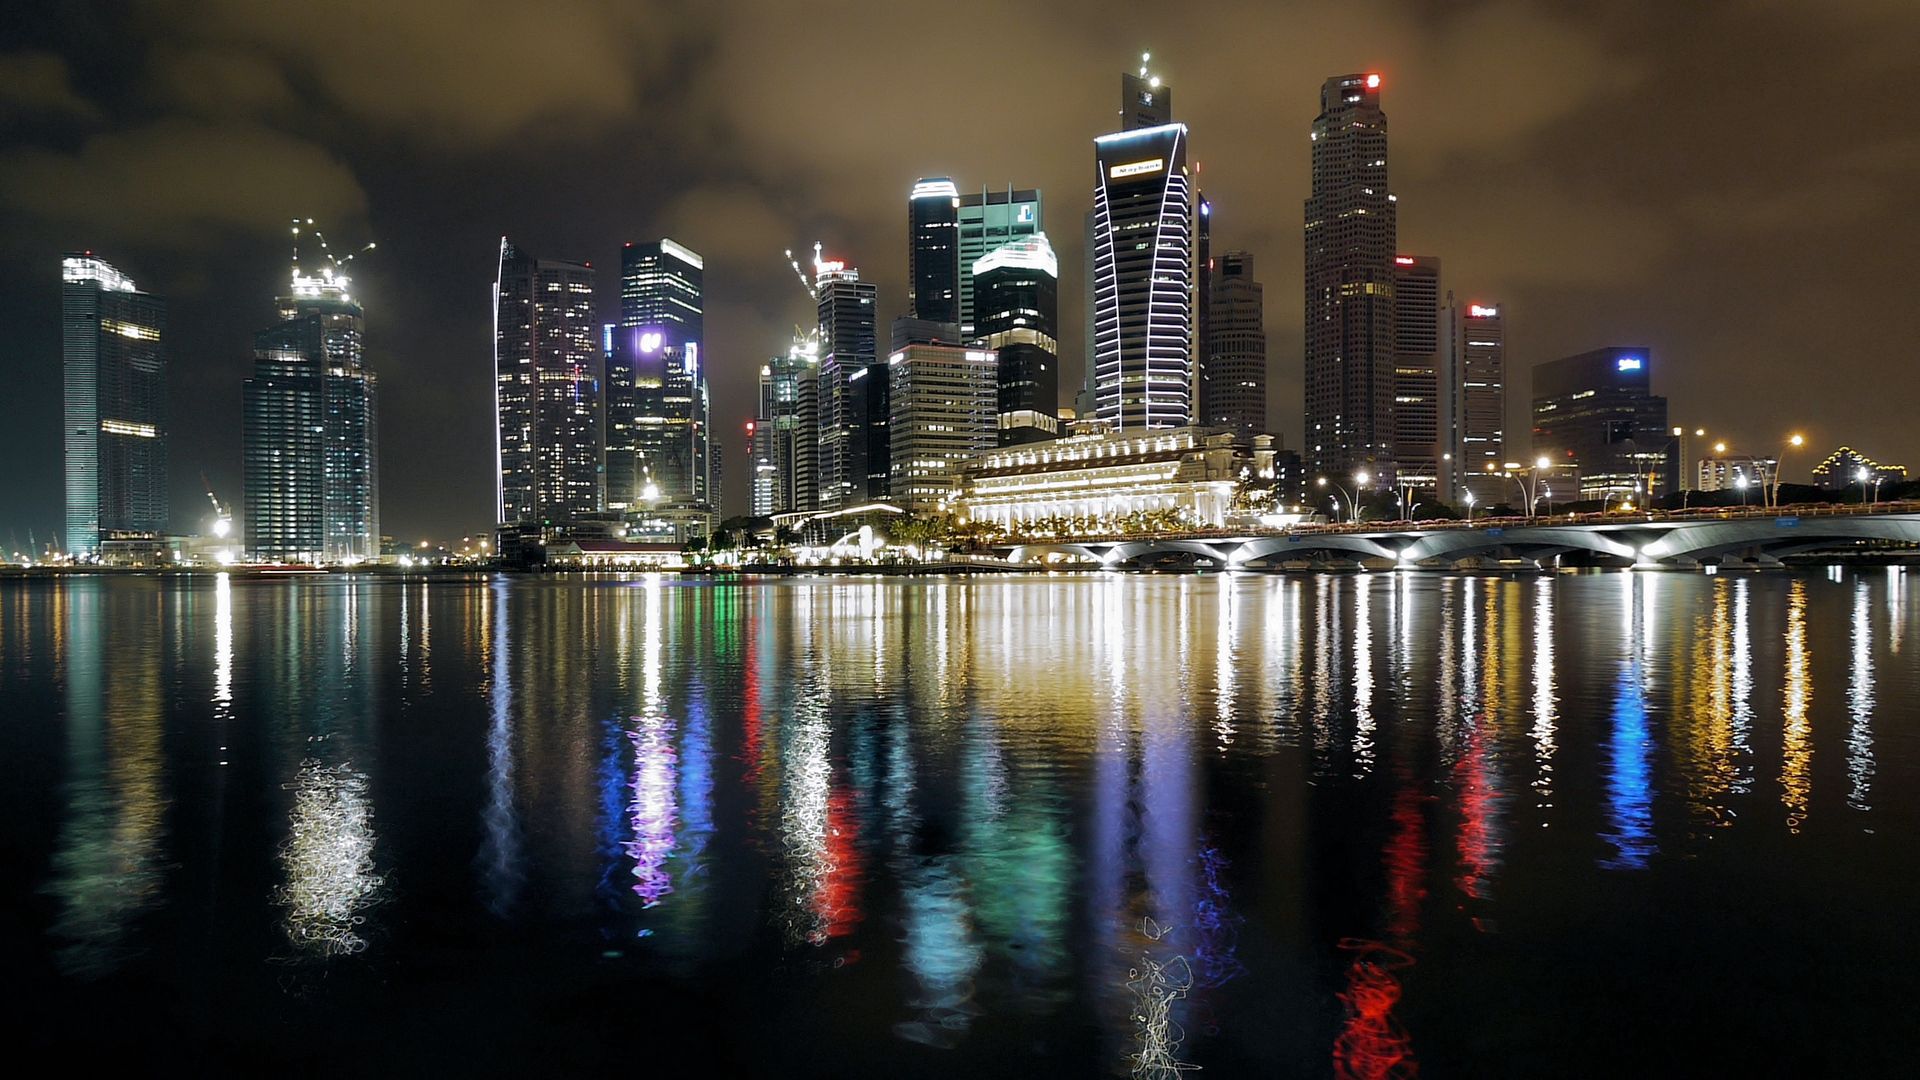 reflection, colorful, cities, night, building, colourful, singapore 1080p